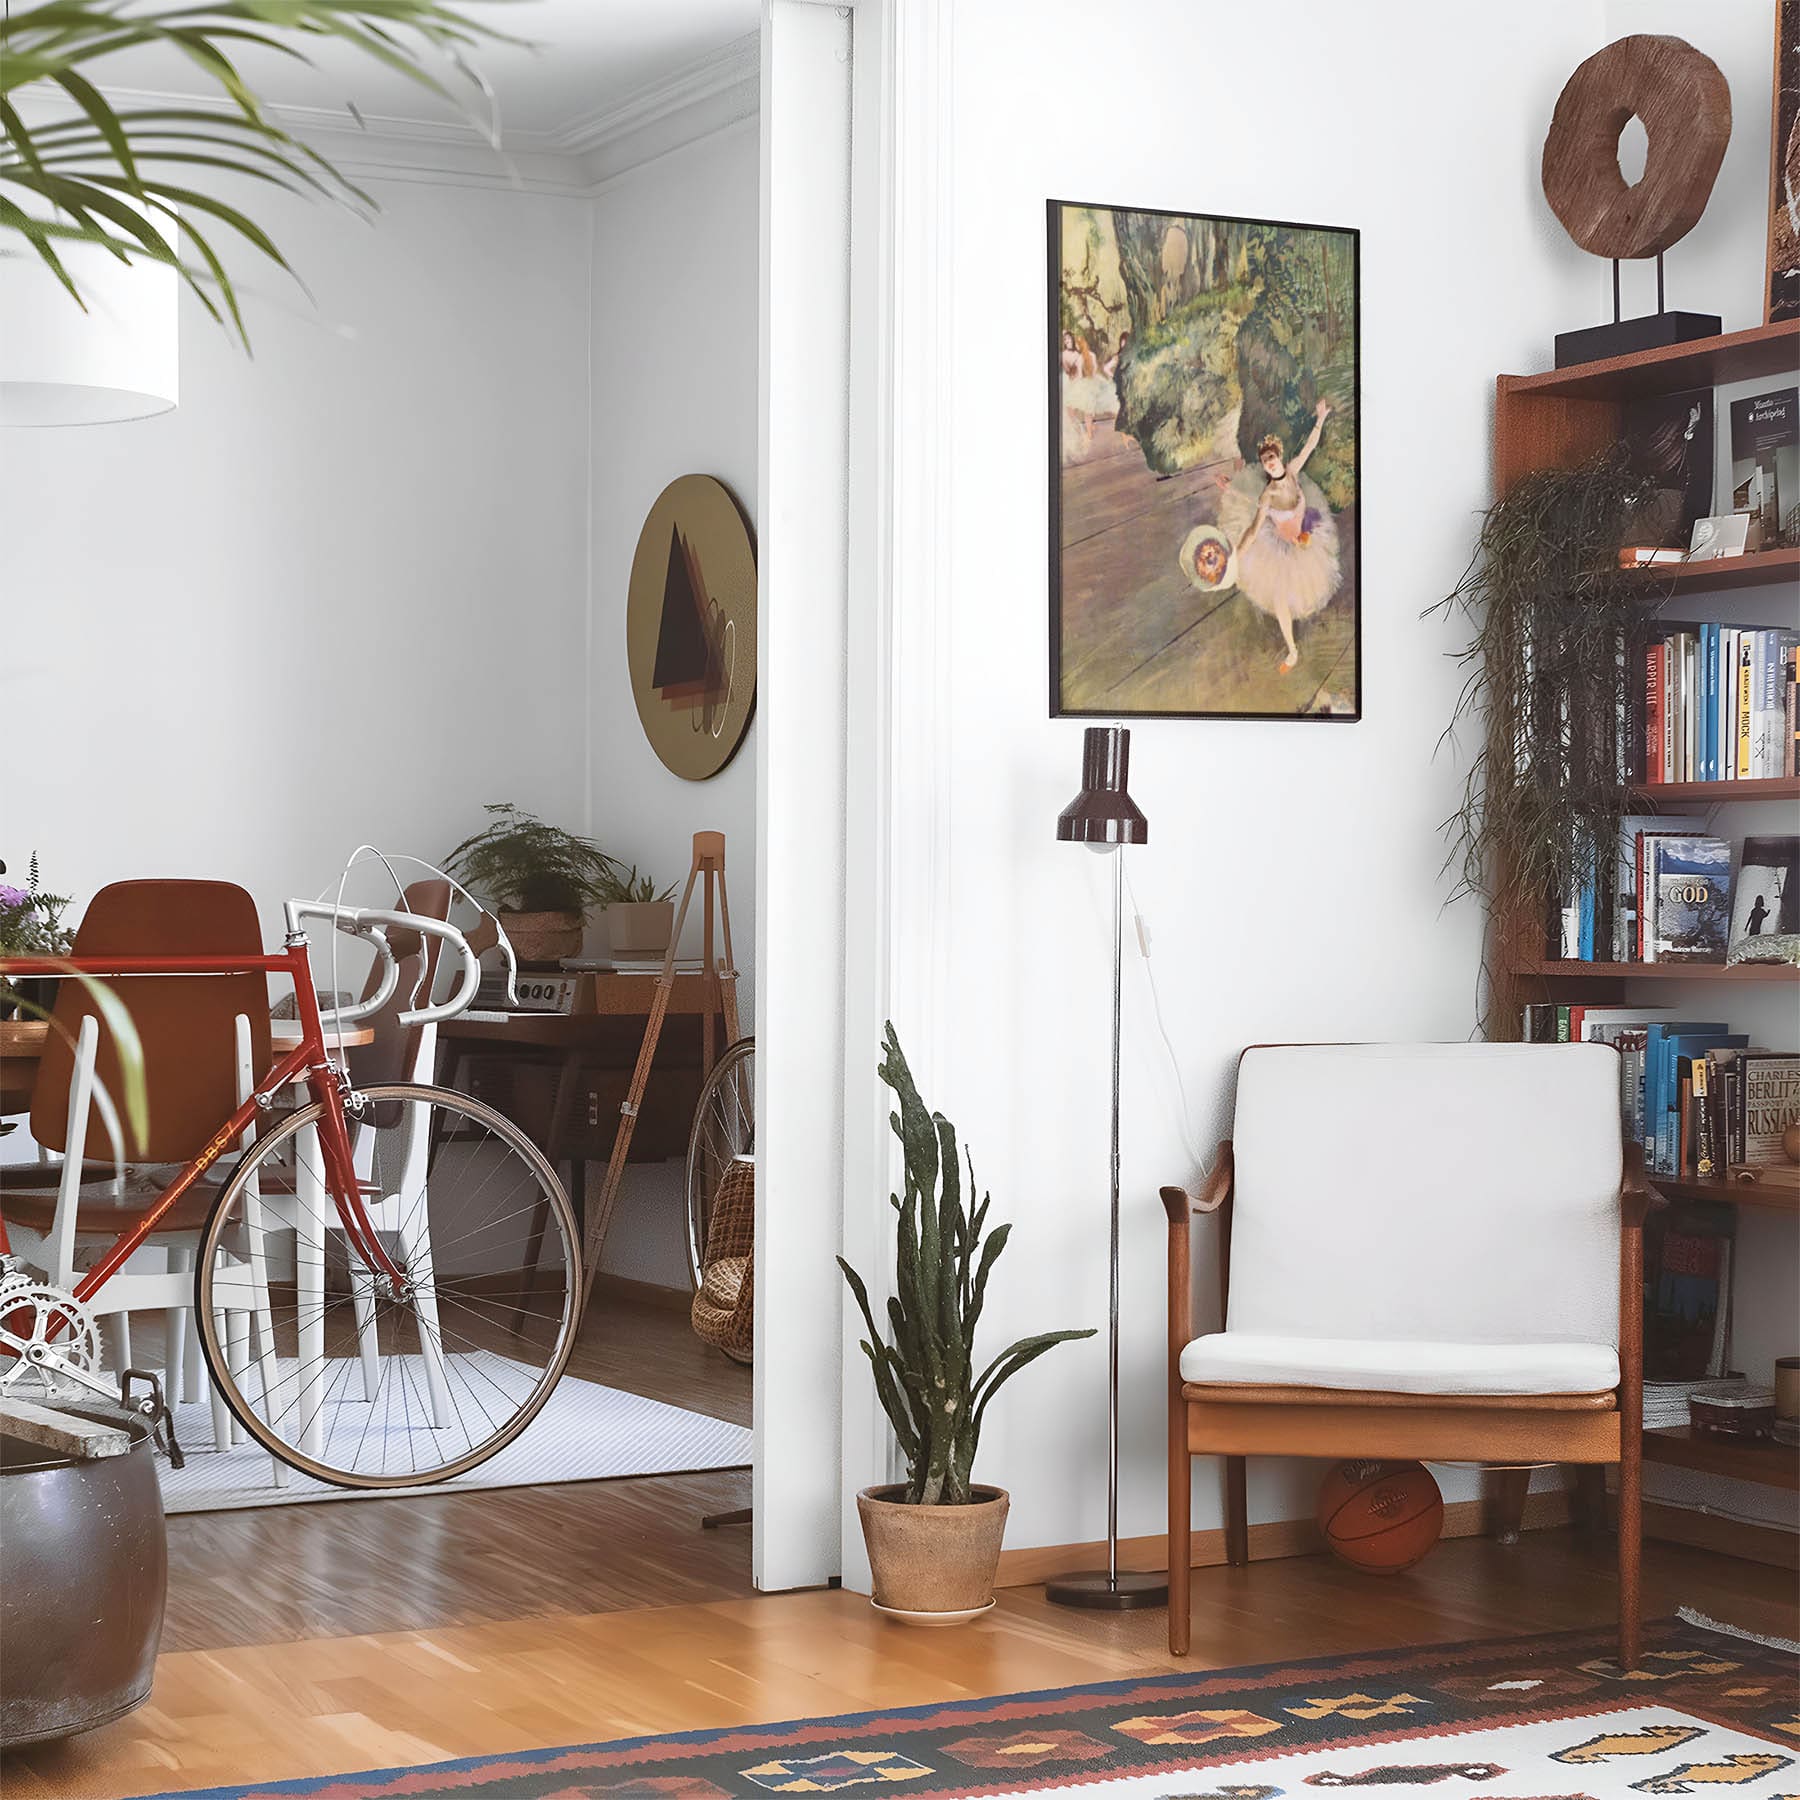 Eclectic living room with a road bike, bookshelf and house plants that features framed artwork of a Light Pink and Sage Green Dancer above a chair and lamp